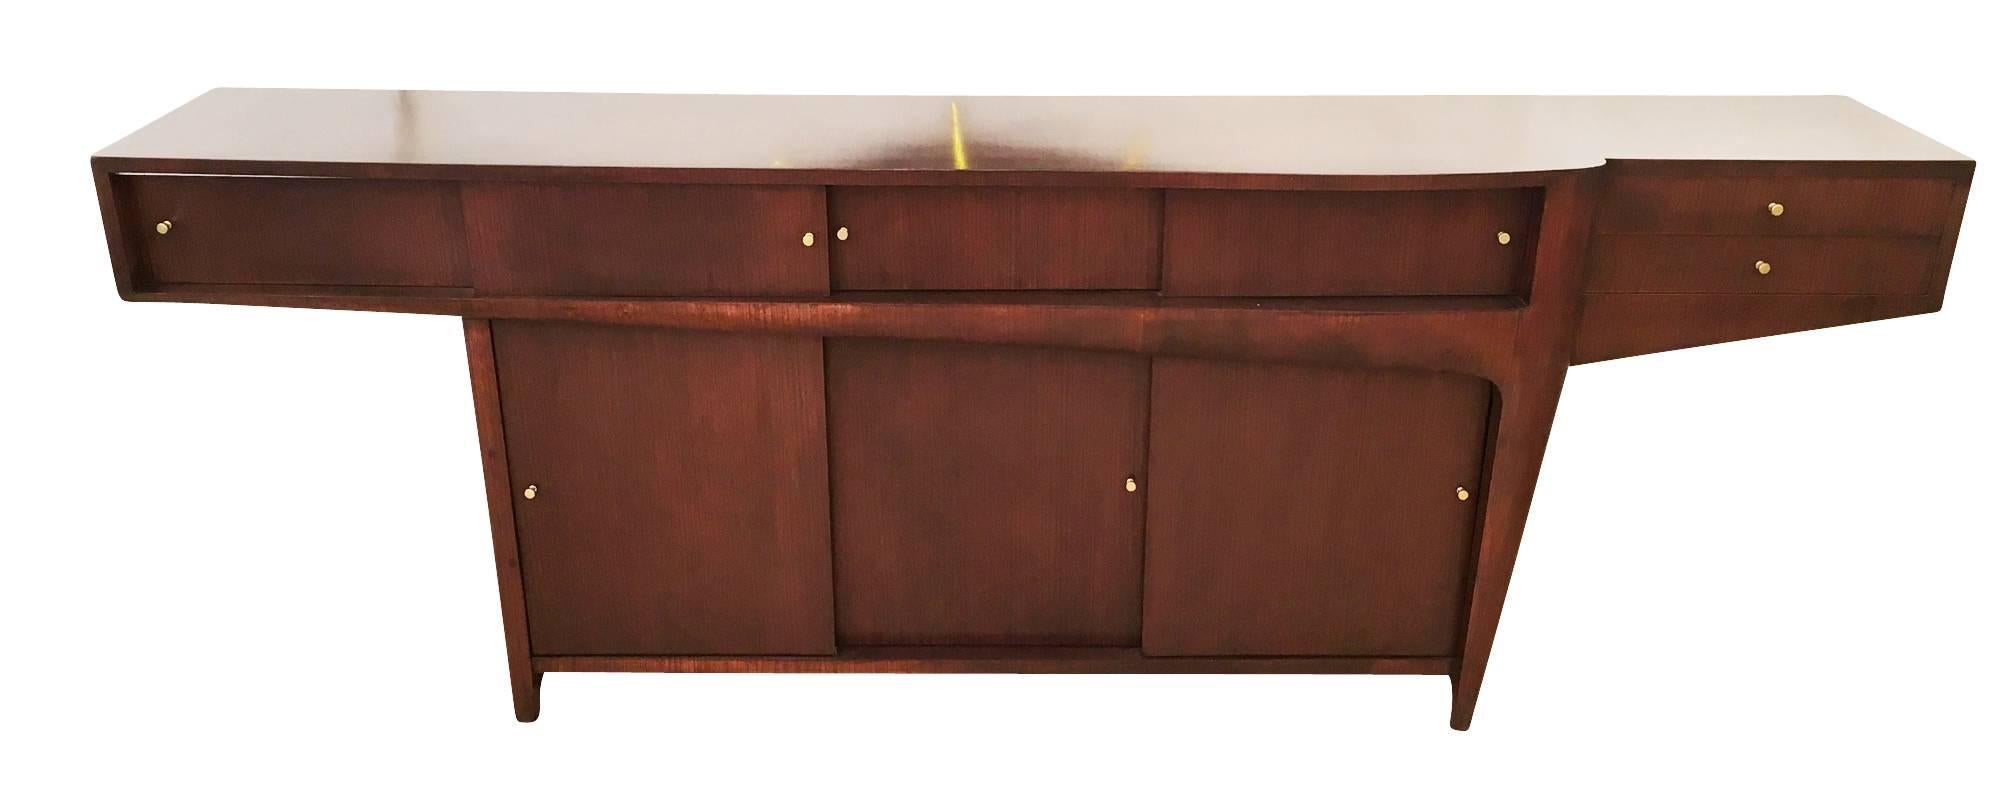 Large 1960s rosewood credenza with an exceptional sleek design. On the upper level it has two compartments with four sliding doors and two drawers on one end. On the lower level it has two large compartments with three sliding doors.
